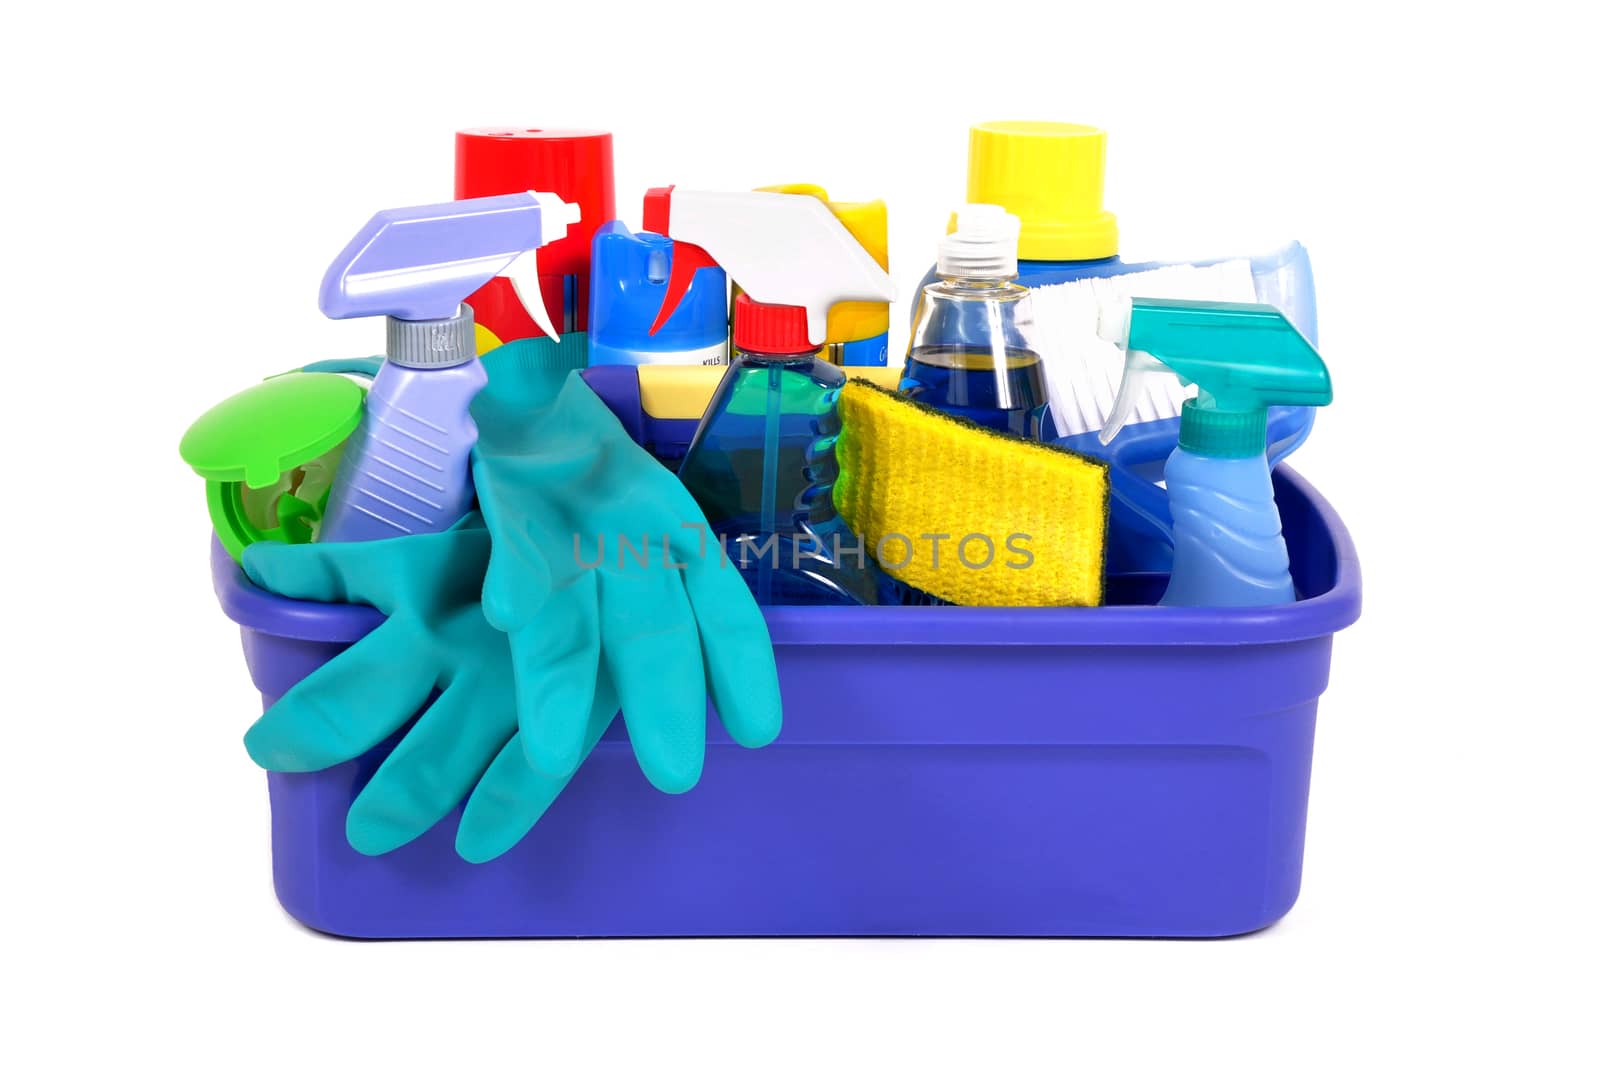 Assorted cleaning products on white background